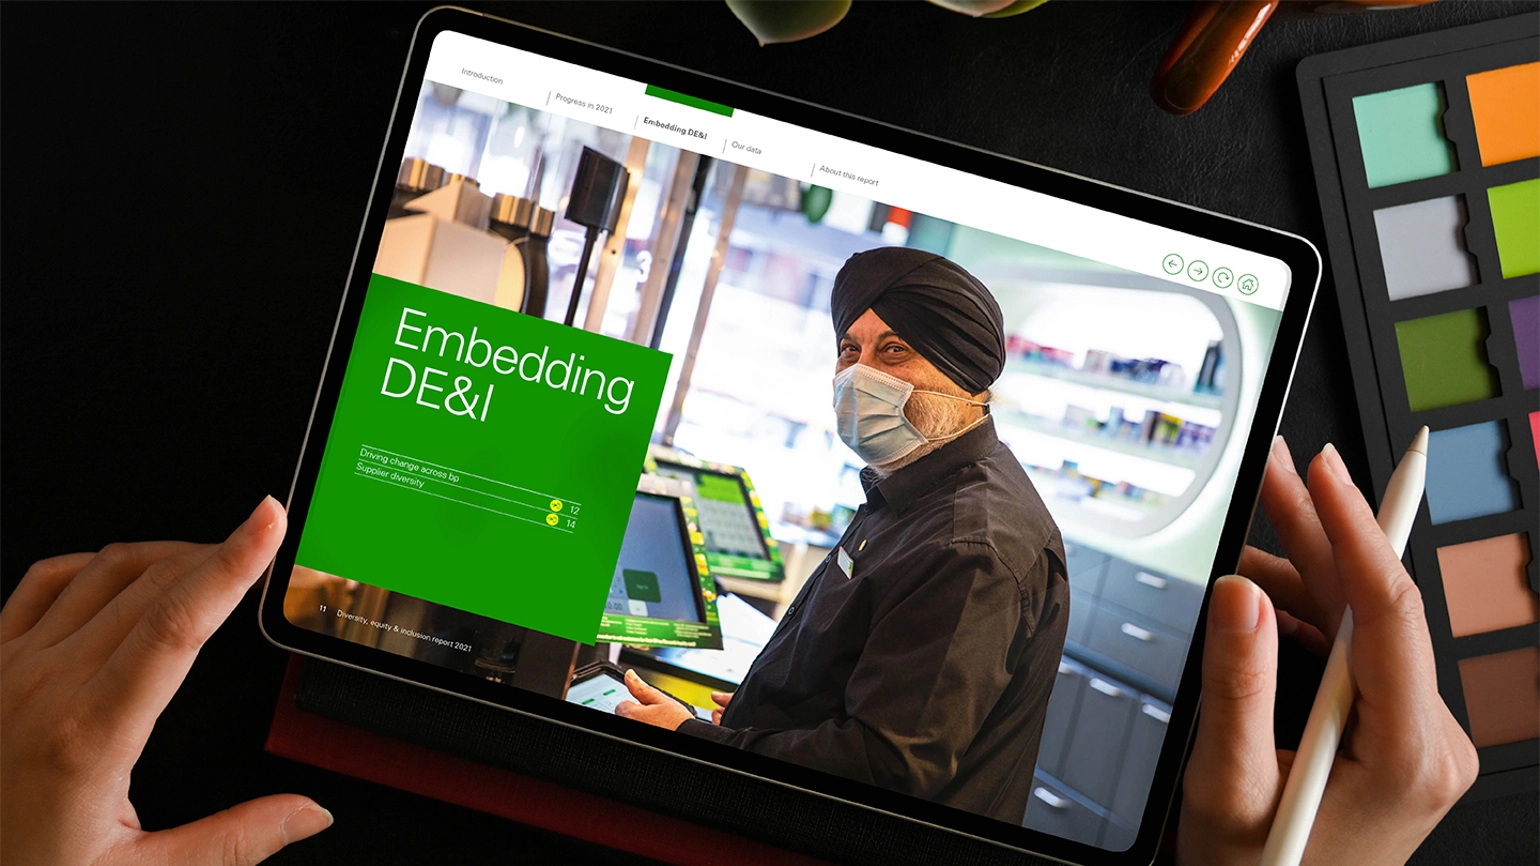 Example of report design within a tablet with a photo of a bp customer service worker wearing a mask on the right and then the title of embedding DE&I on the left